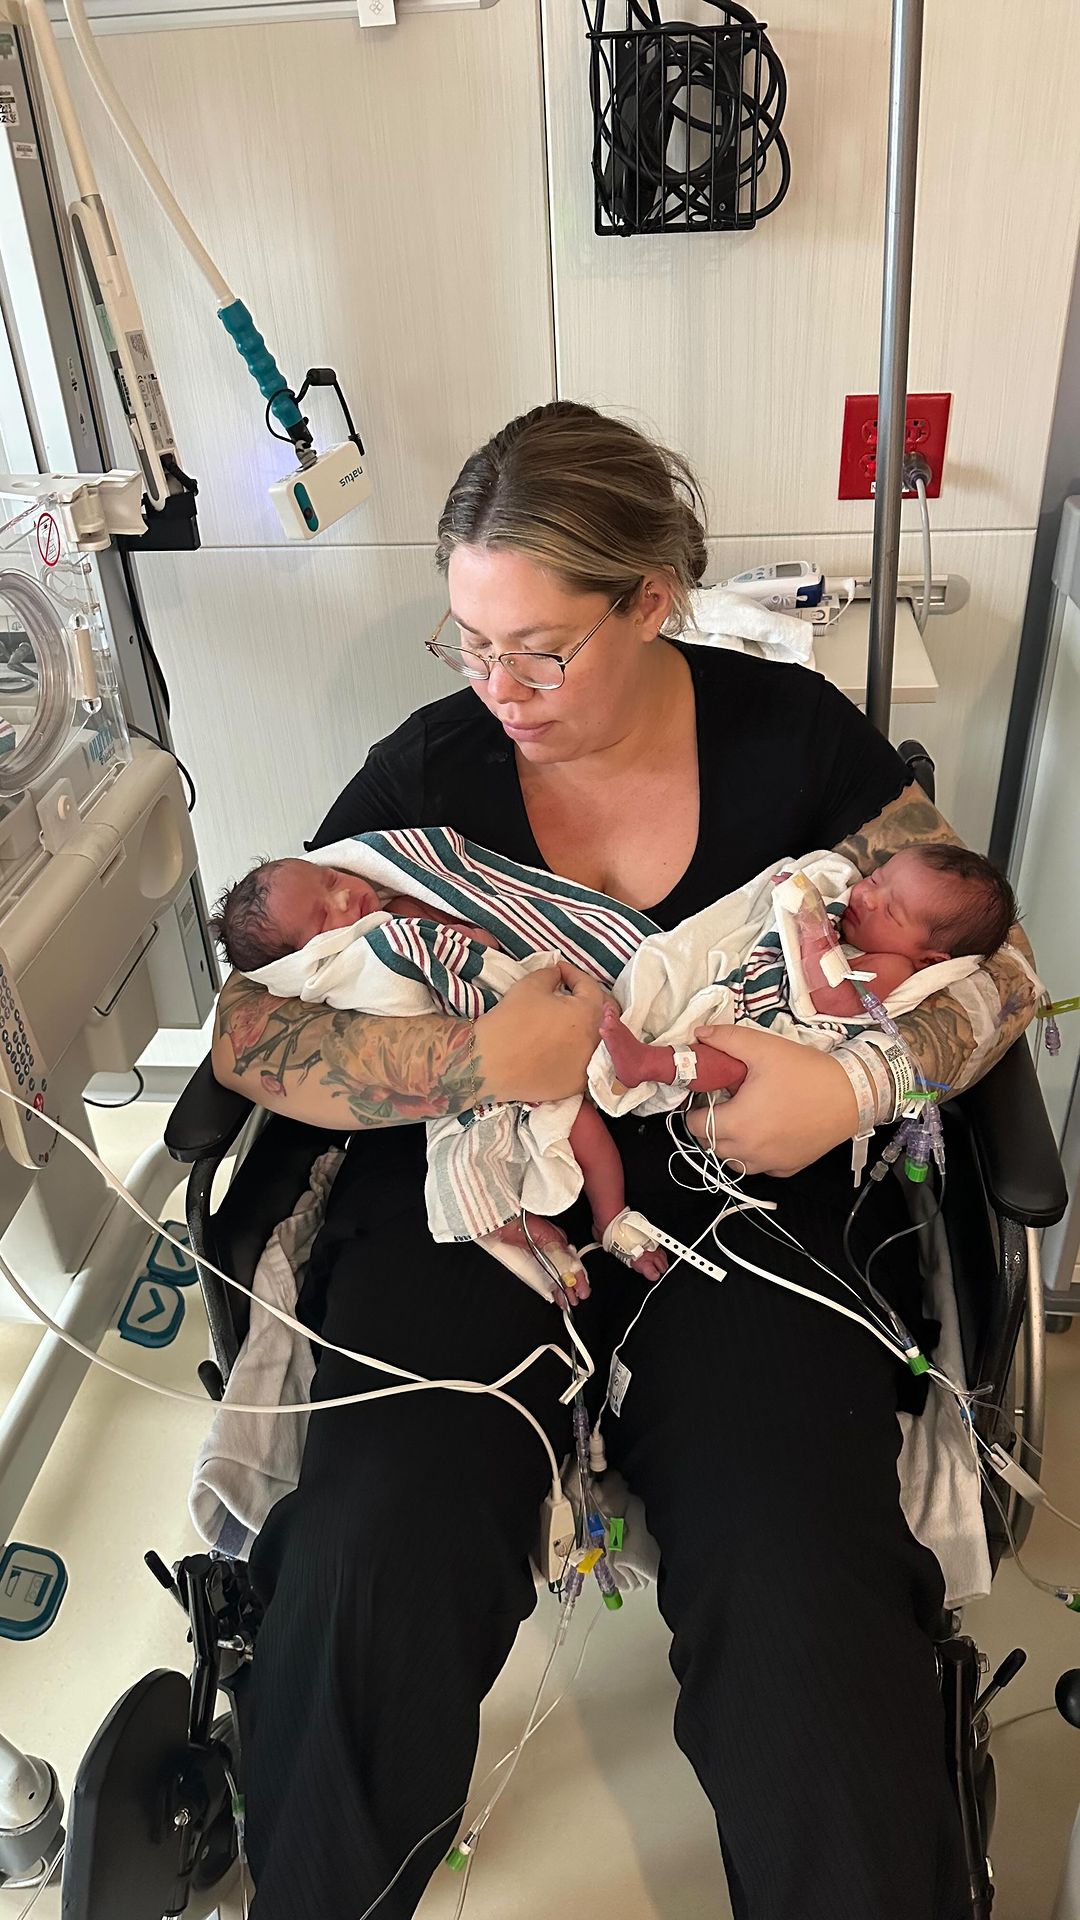 Kailyn welcomed twin babies in November